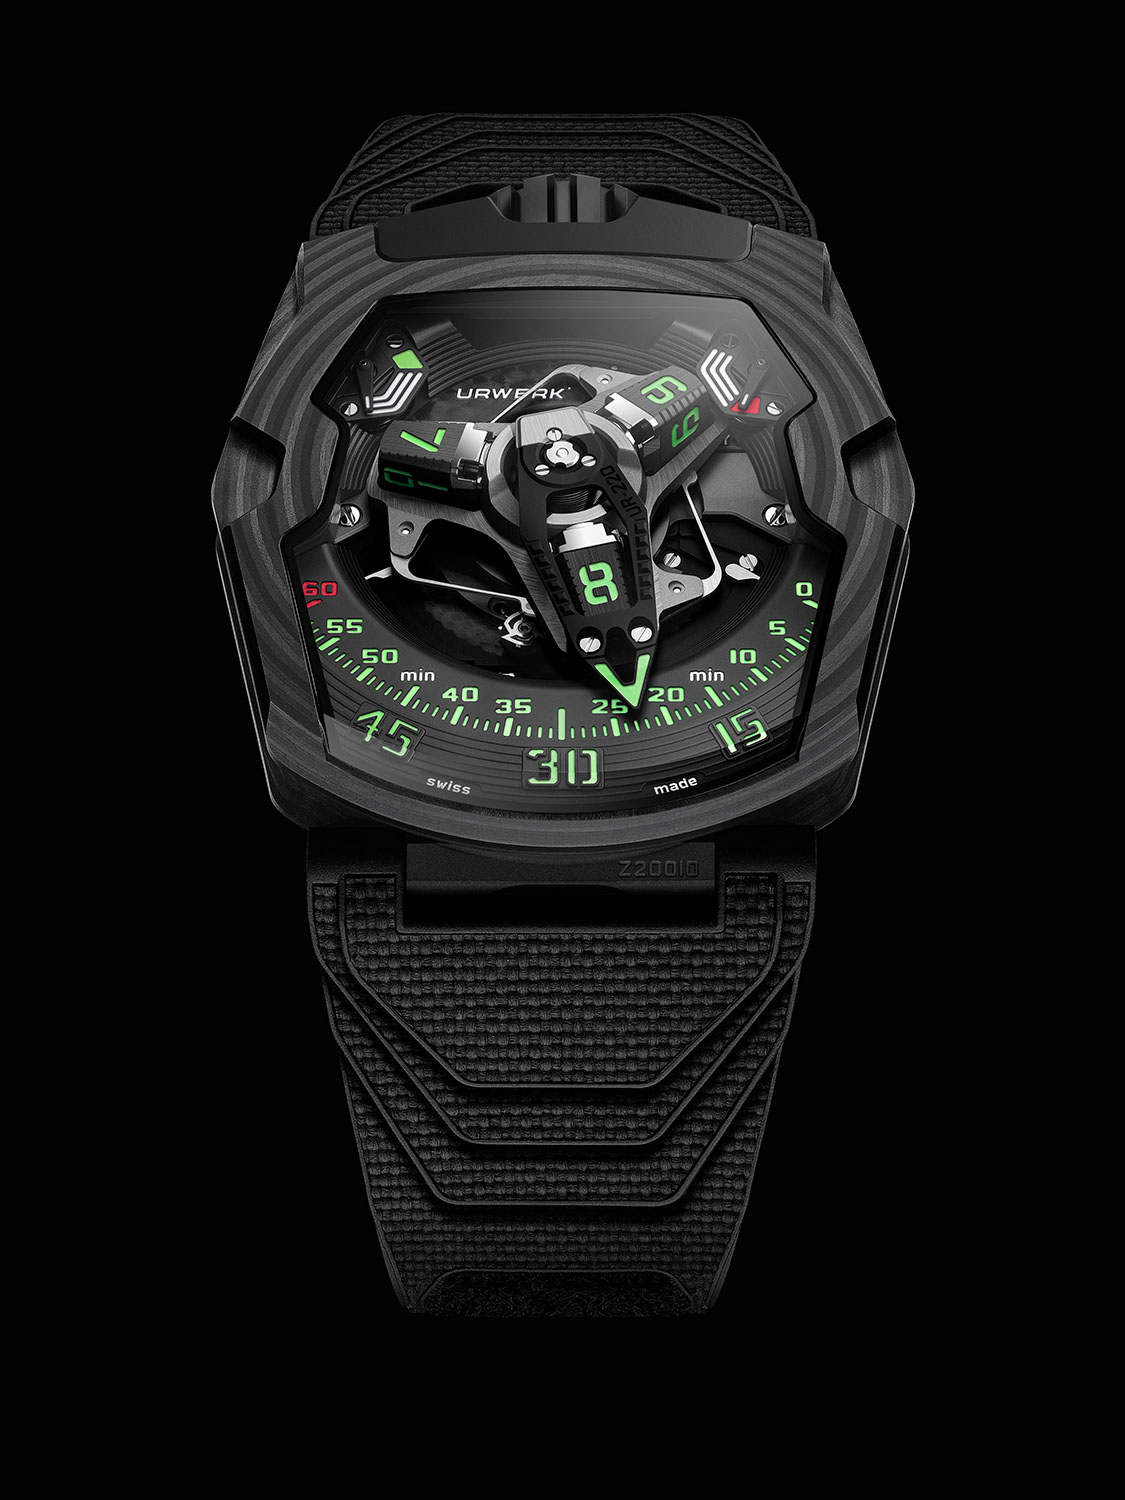 The URWERK UR-220 “Falcon Project” Carbon Edition